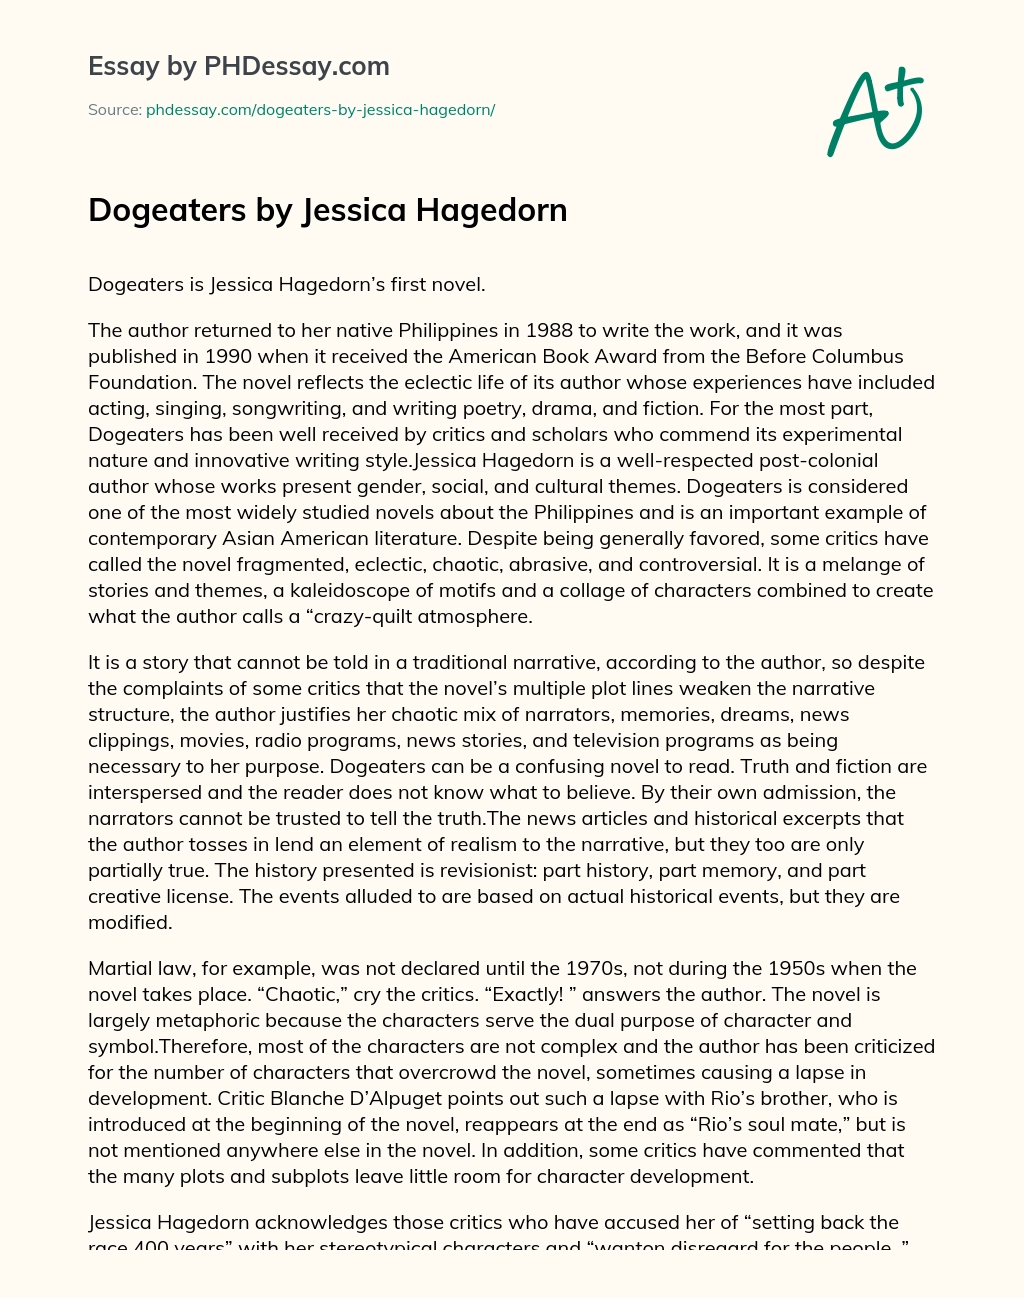 Dogeaters by Jessica Hagedorn essay